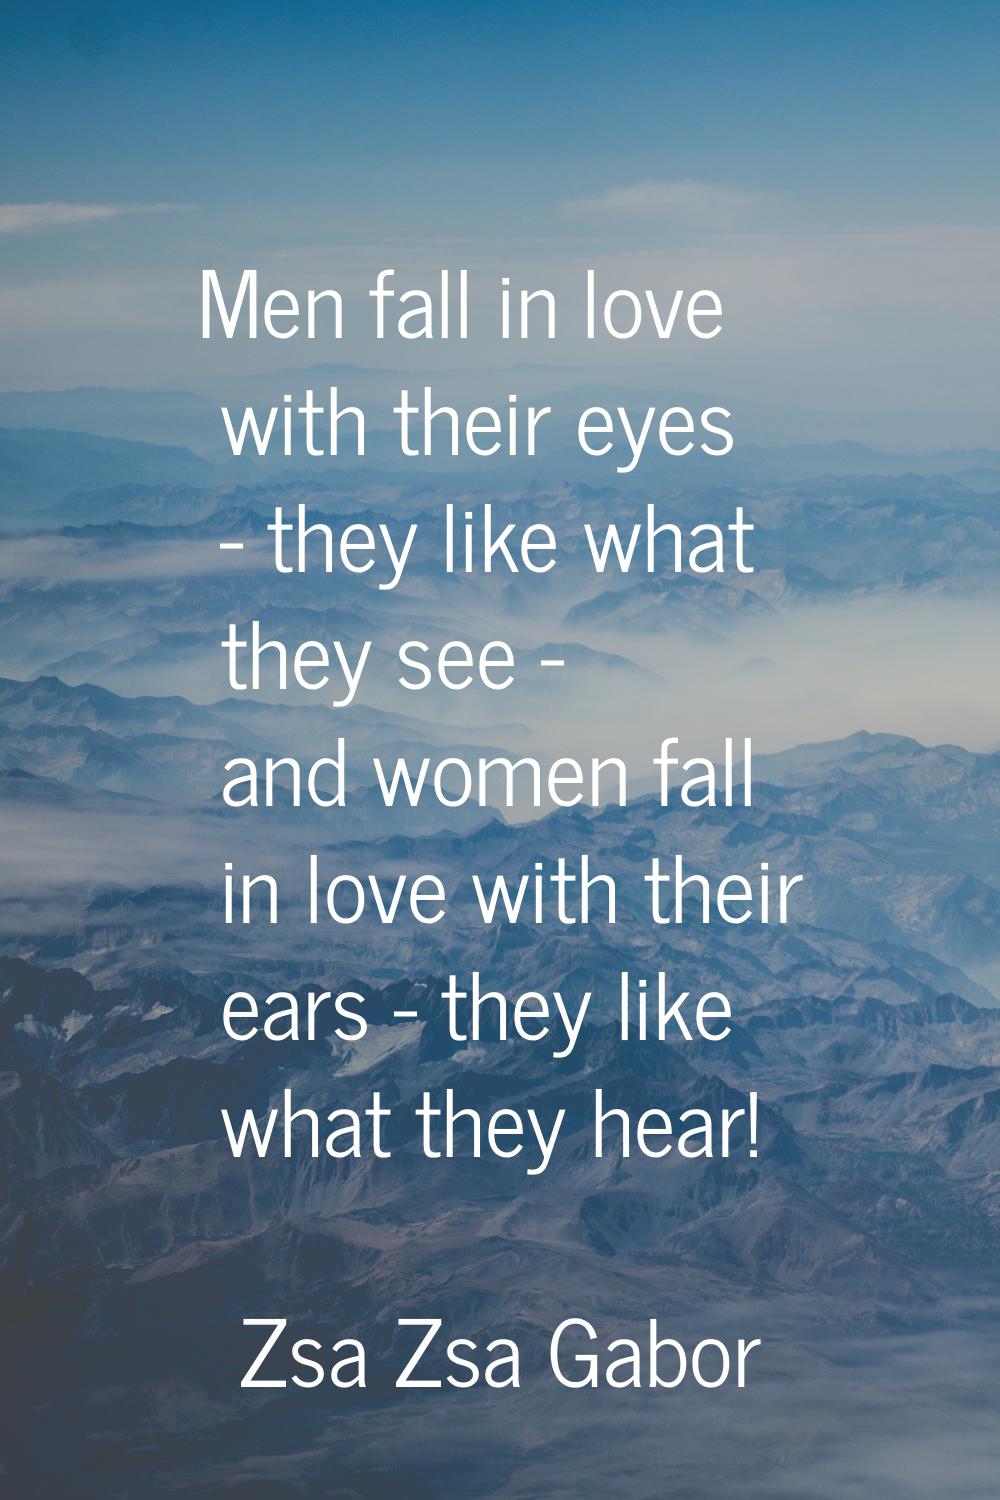 Men fall in love with their eyes - they like what they see - and women fall in love with their ears